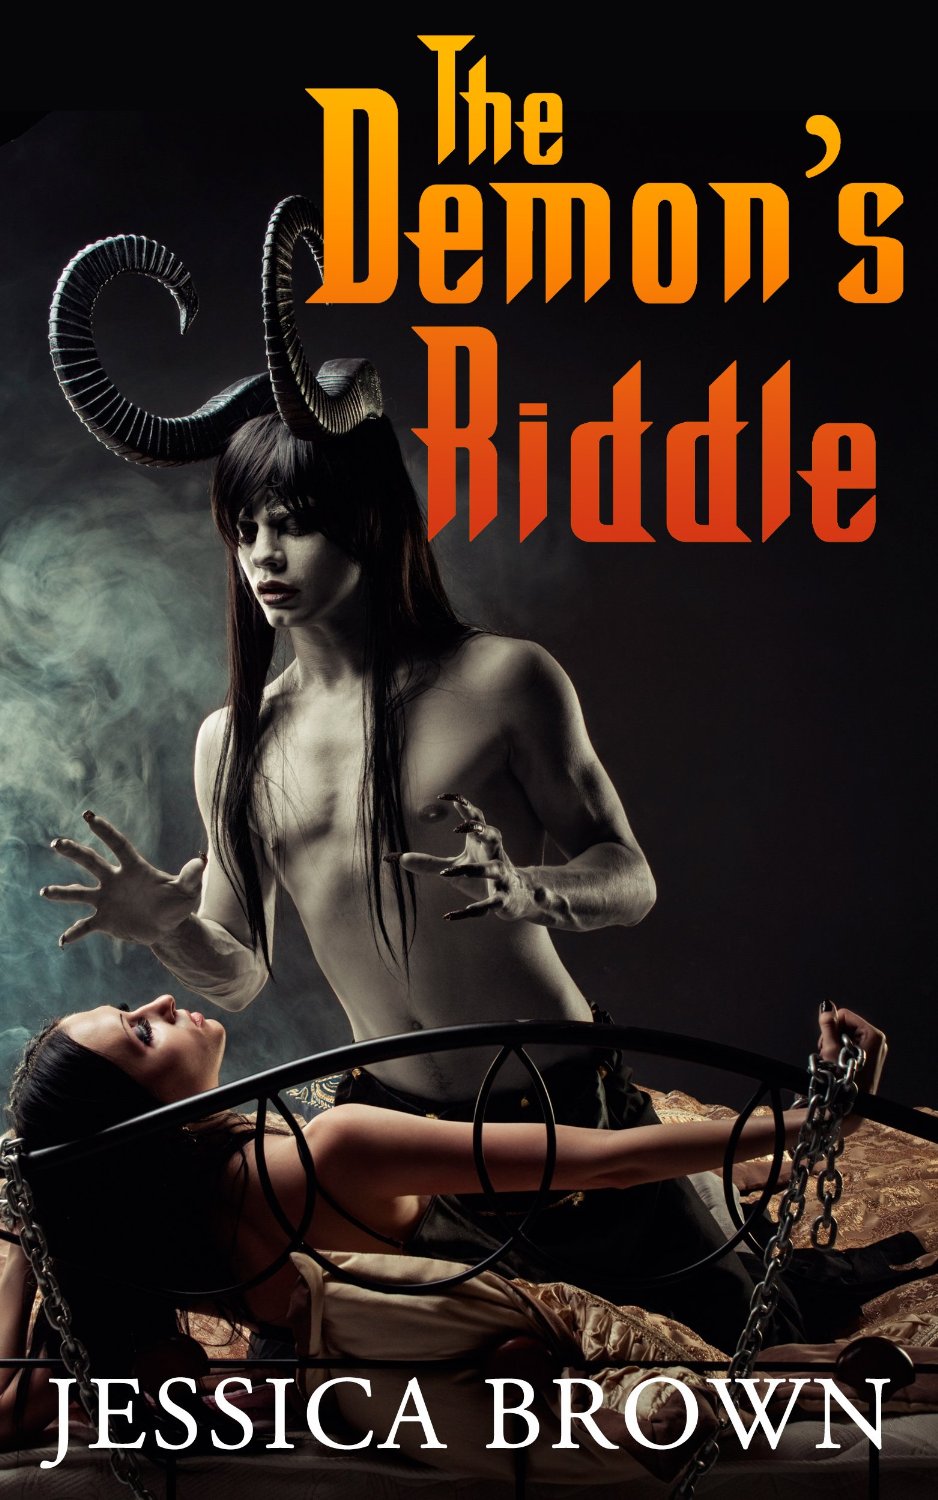 The Demon’s Riddle by Jessica Brown